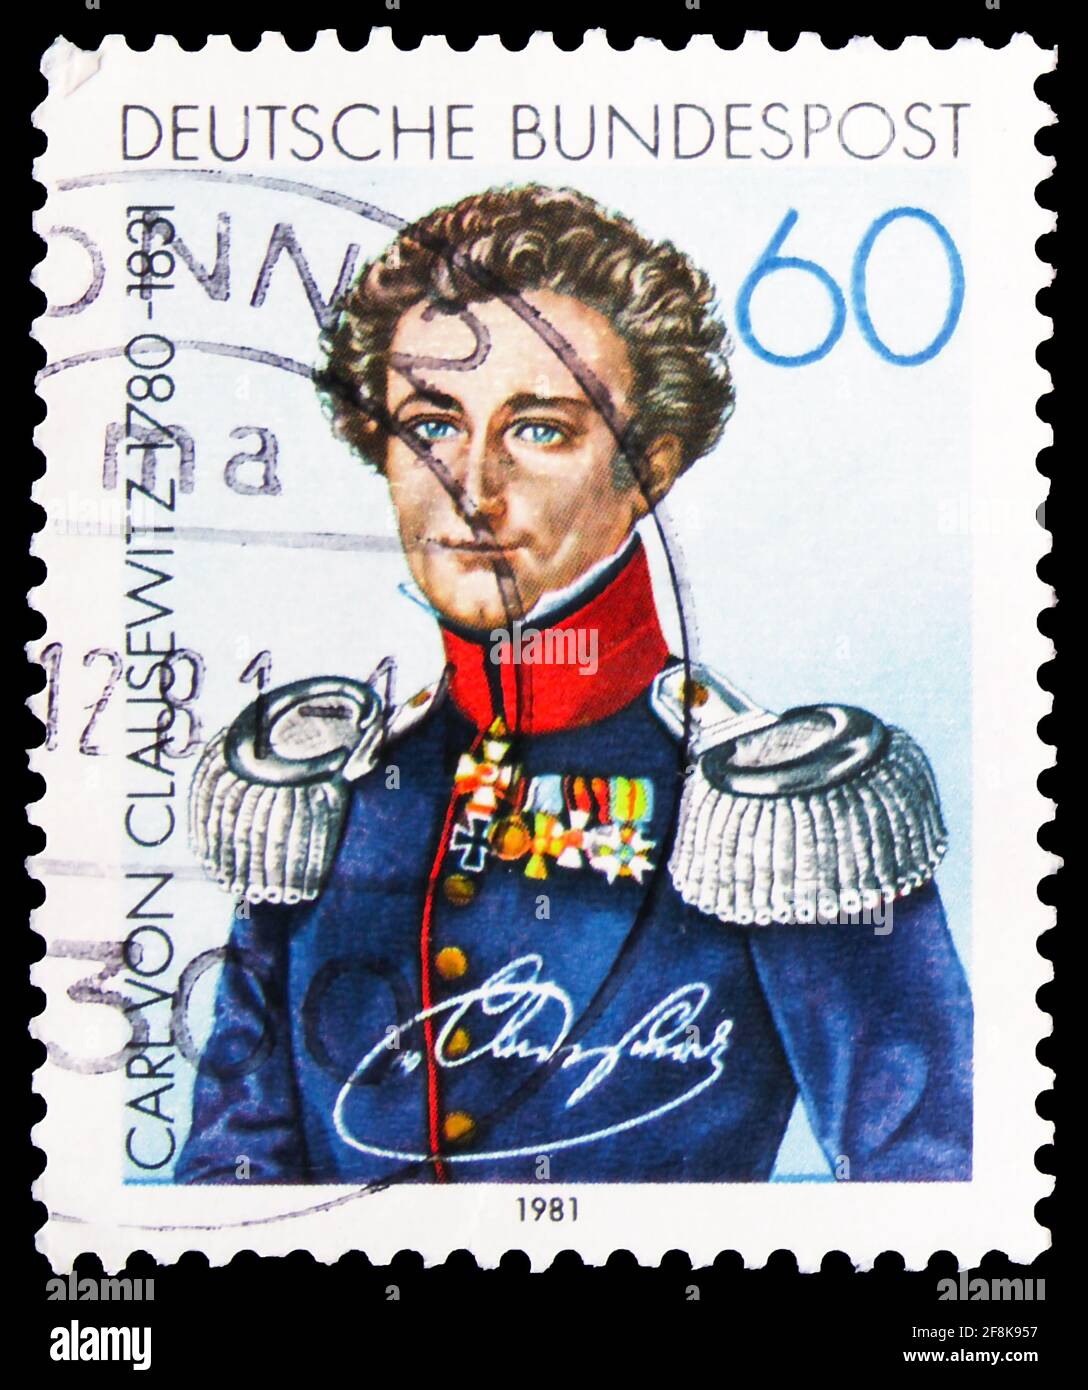 MOSCOW, RUSSIA - OCTOBER 7, 2019: Postage stamp printed in Germany shows General Carl von Clausewitz, Clausewitz, General Carl von, (military writer) Stock Photo